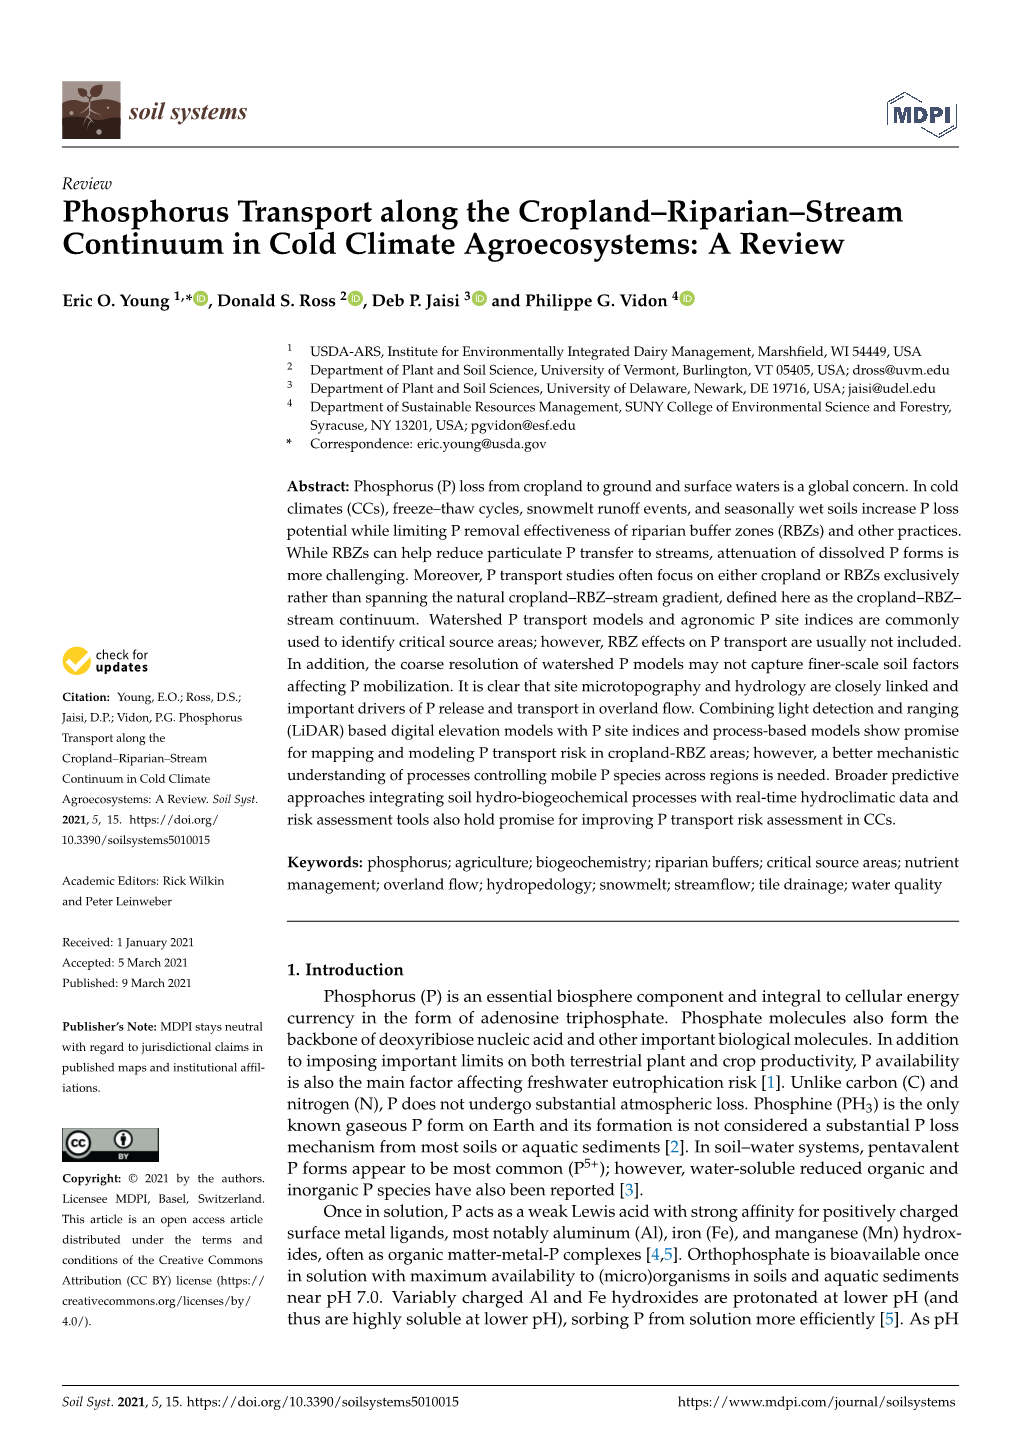 Phosphorus Transport Along the Cropland–Riparian–Stream Continuum in Cold Climate Agroecosystems: a Review